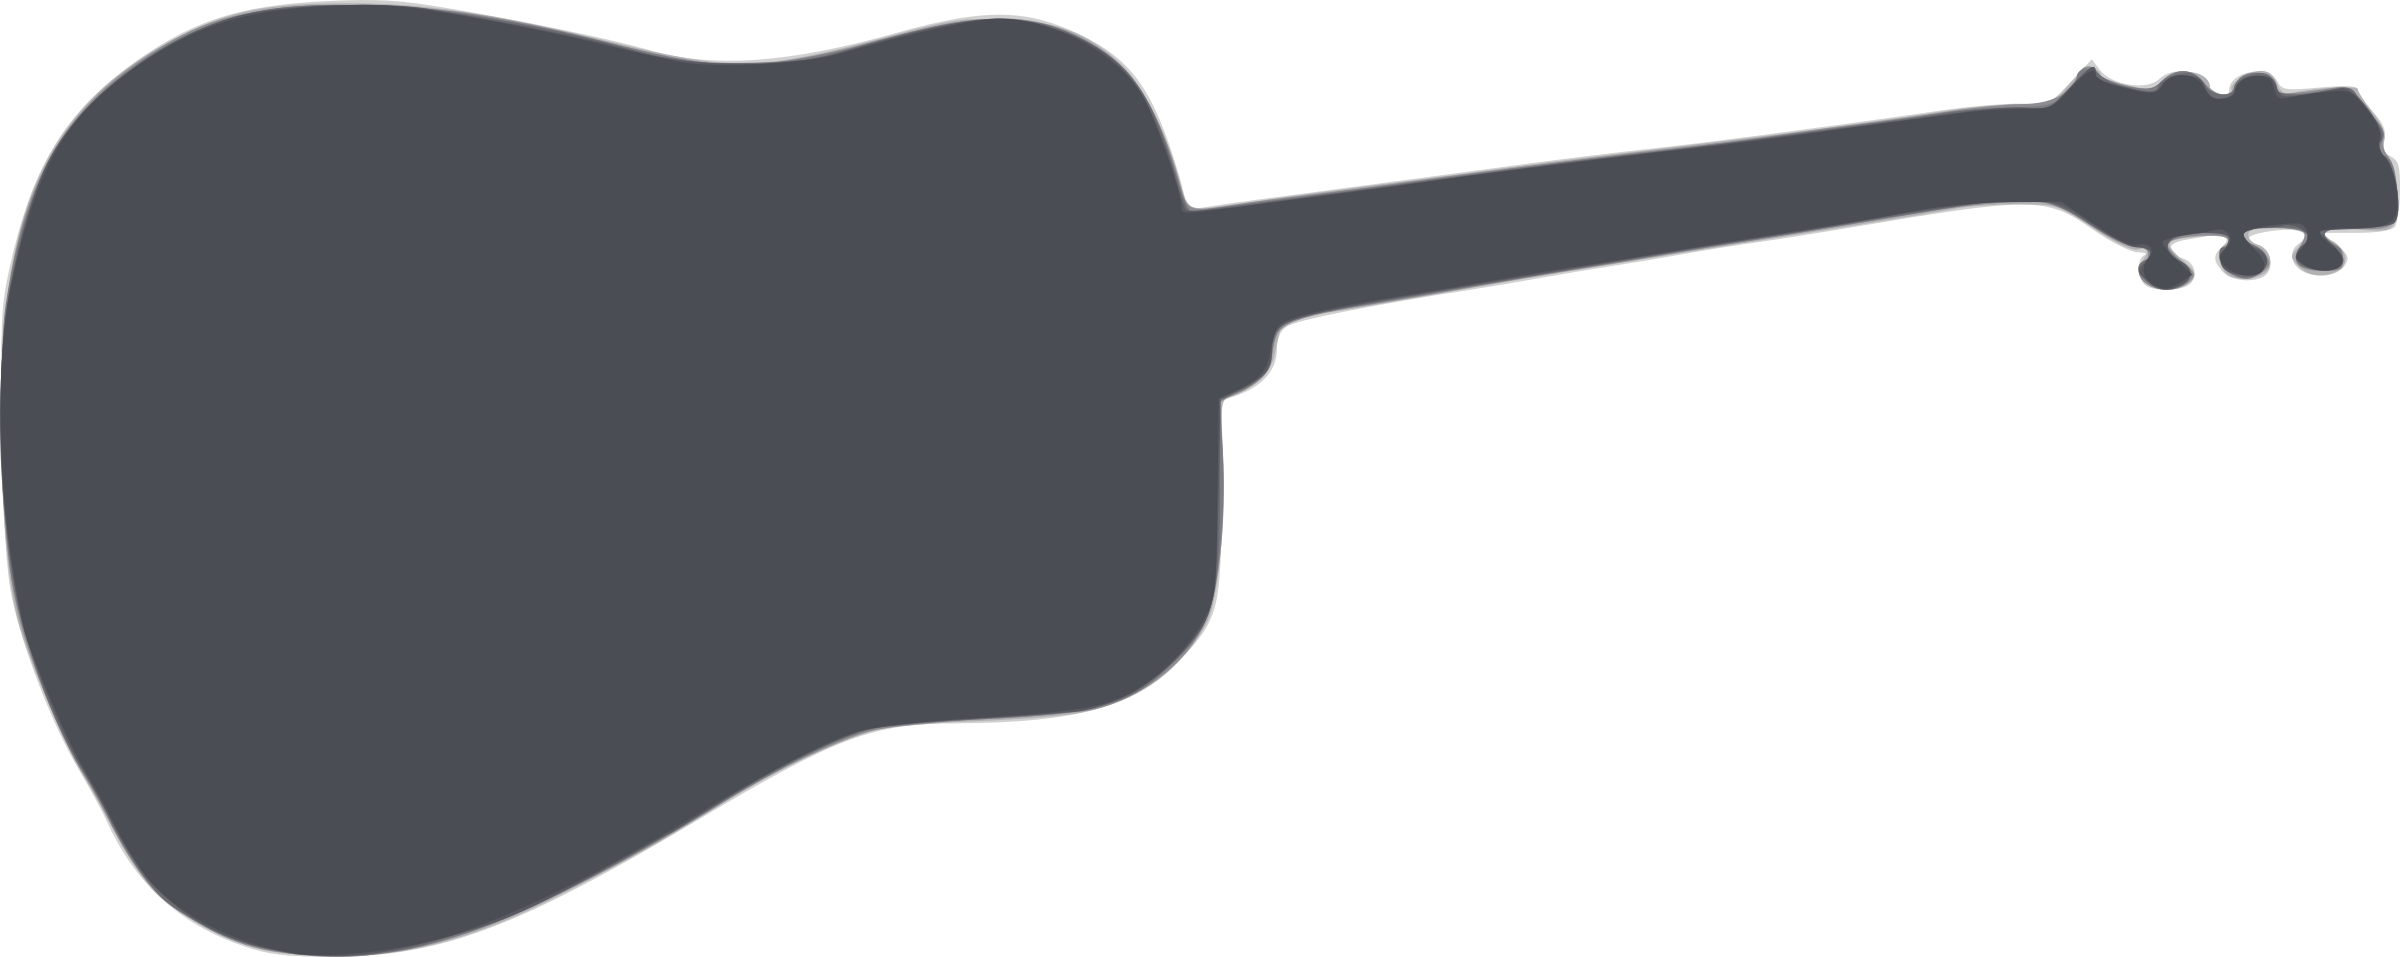 Silhouette Musique 12 - White Guitar Silhouette Png (2400x957)